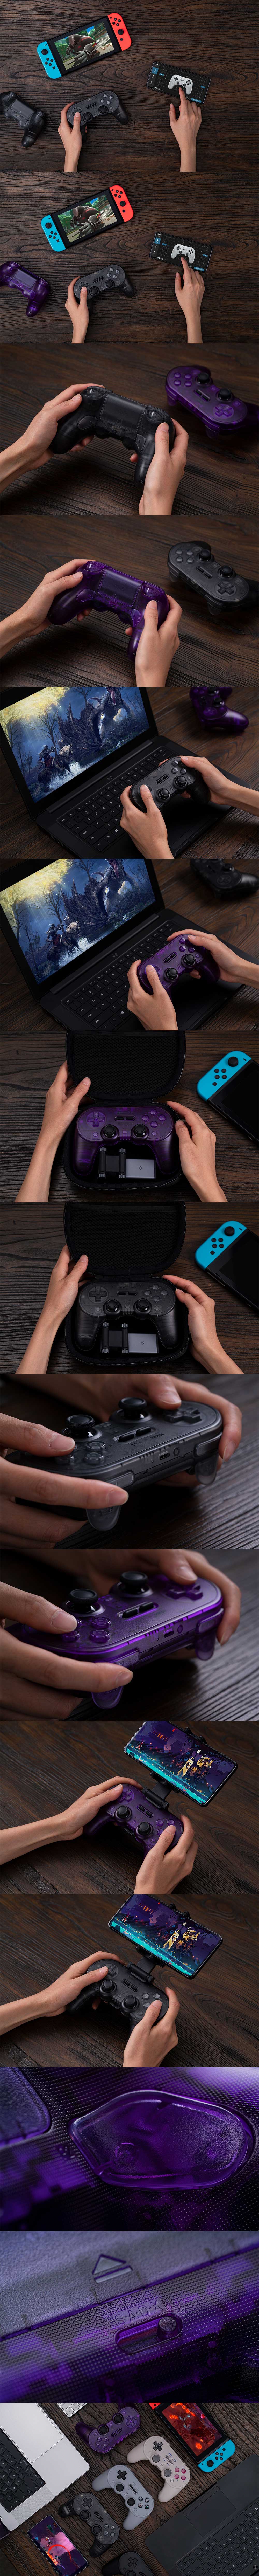 8Bitdo Pro 2 bluetooth Game Controller with Back Key Wireless Joystick Gamepad for Switch PC Android Steam